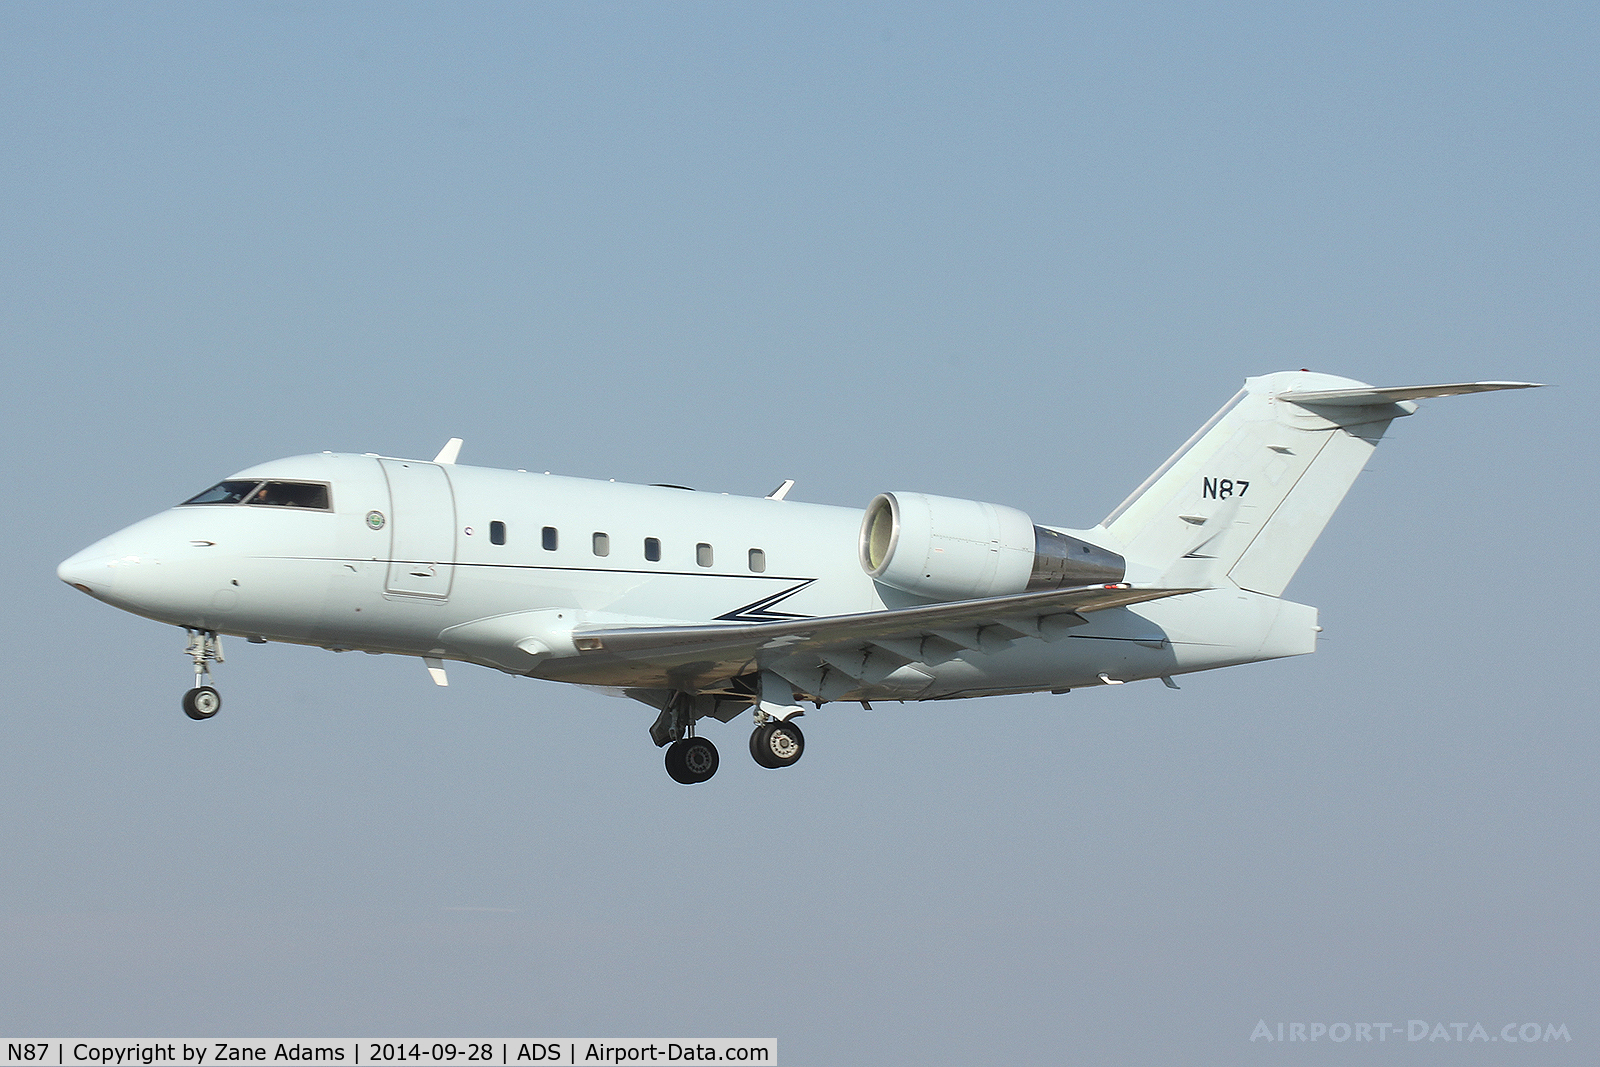 N87, 1995 Canadair Challenger 601-3R (CL-600-2B16) C/N 5190, The Feds doing a low pass at Addison Airport.